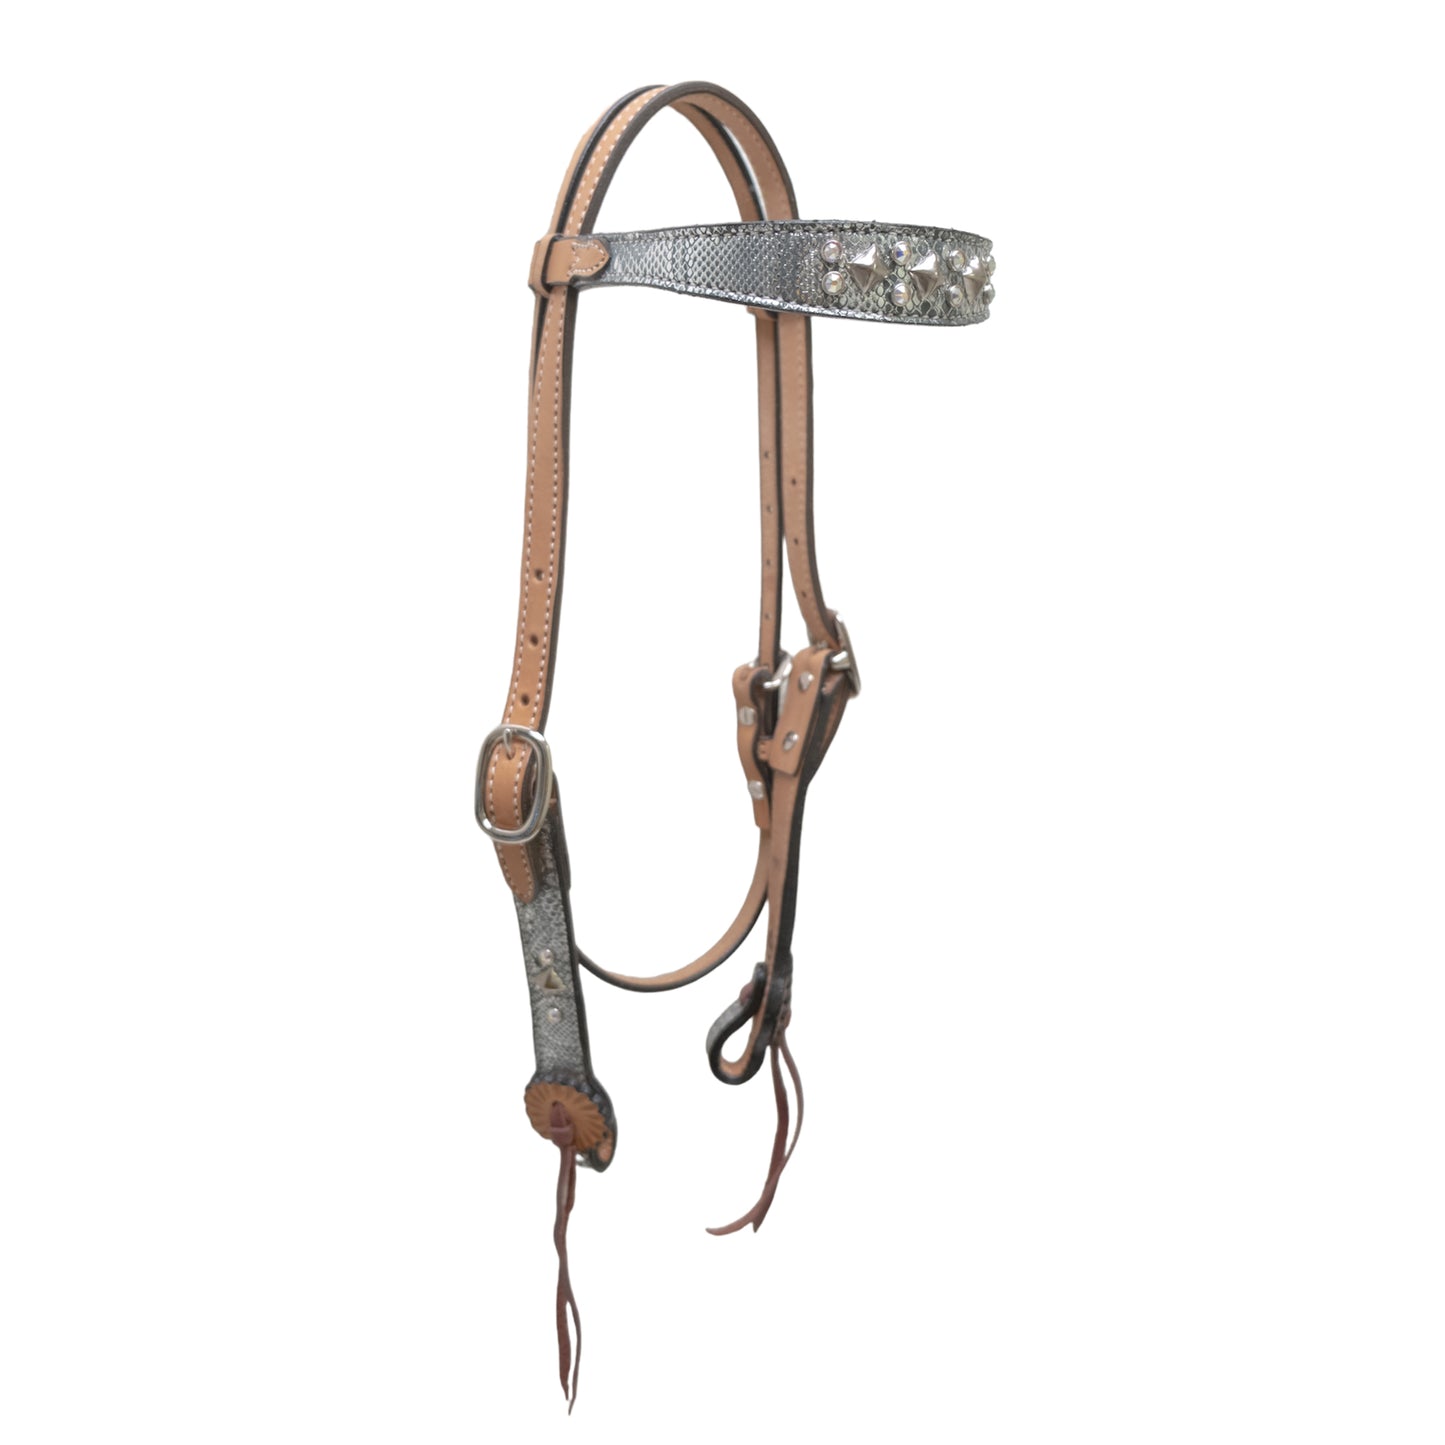 1-1/2" Contour browband headstall golden leather silver python overlay with Swarovski crystals and SS pyramid spots. 